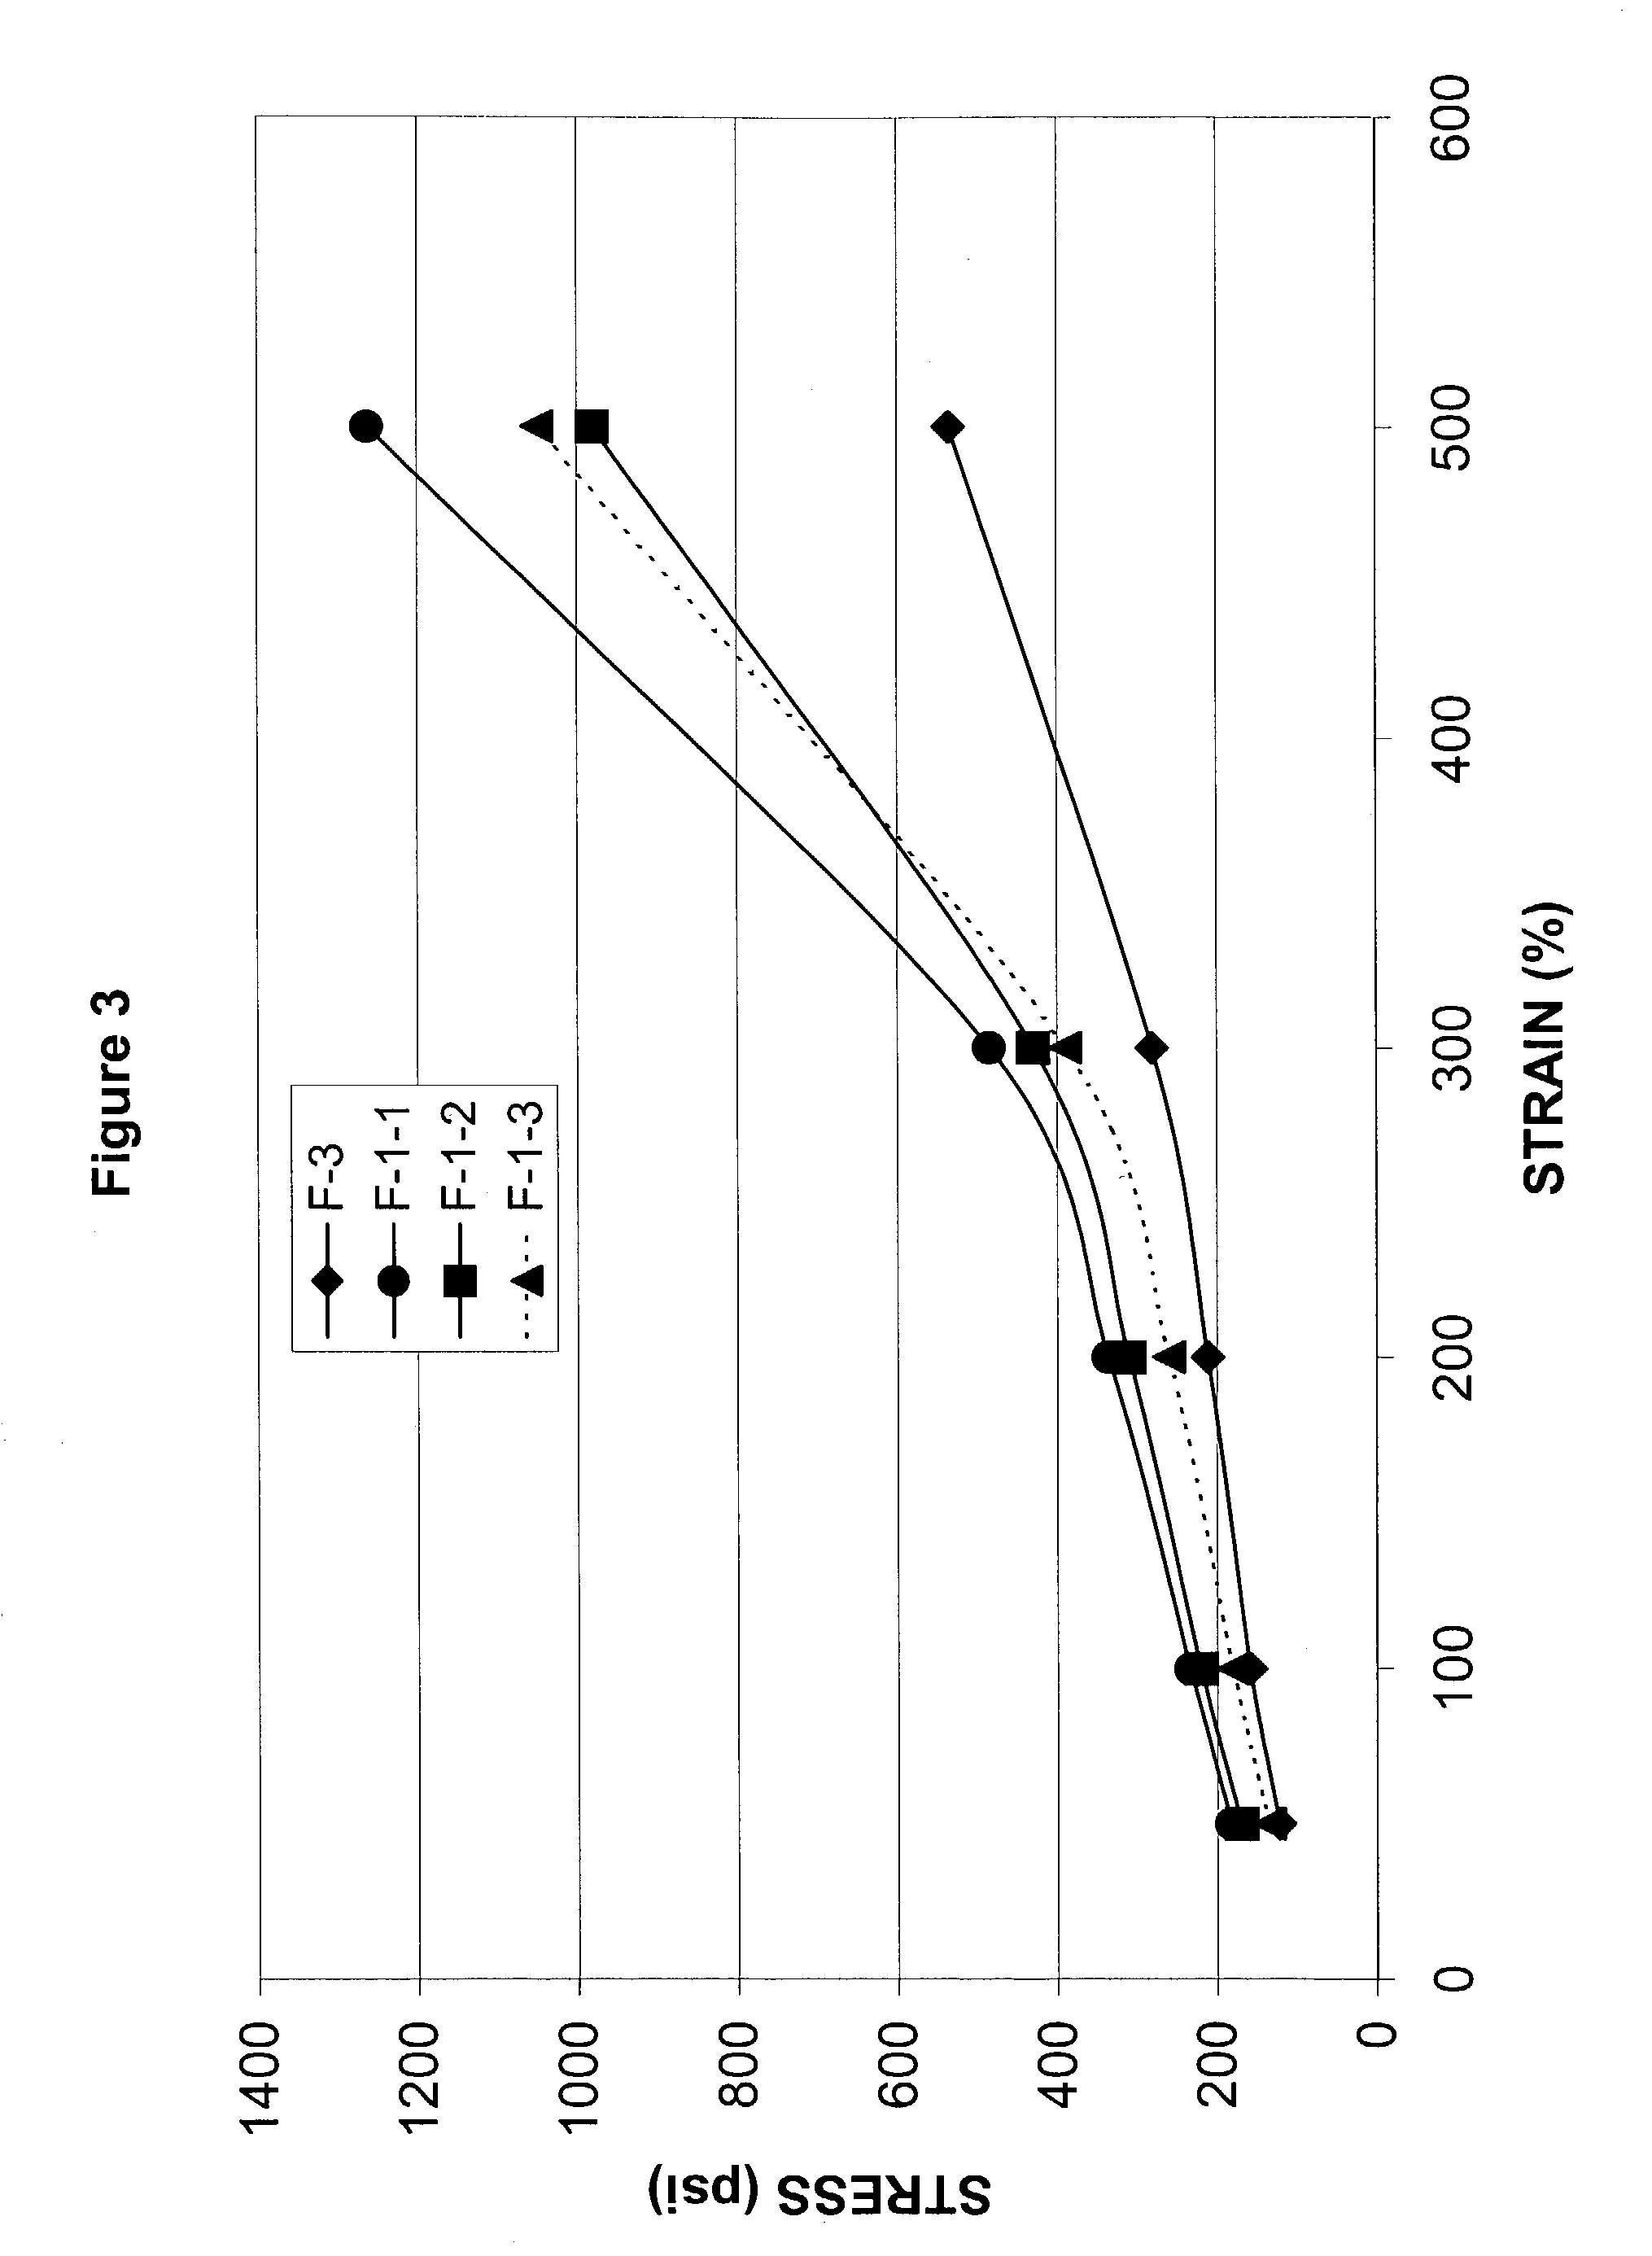 Tetrablock copolymer and compositions containing same